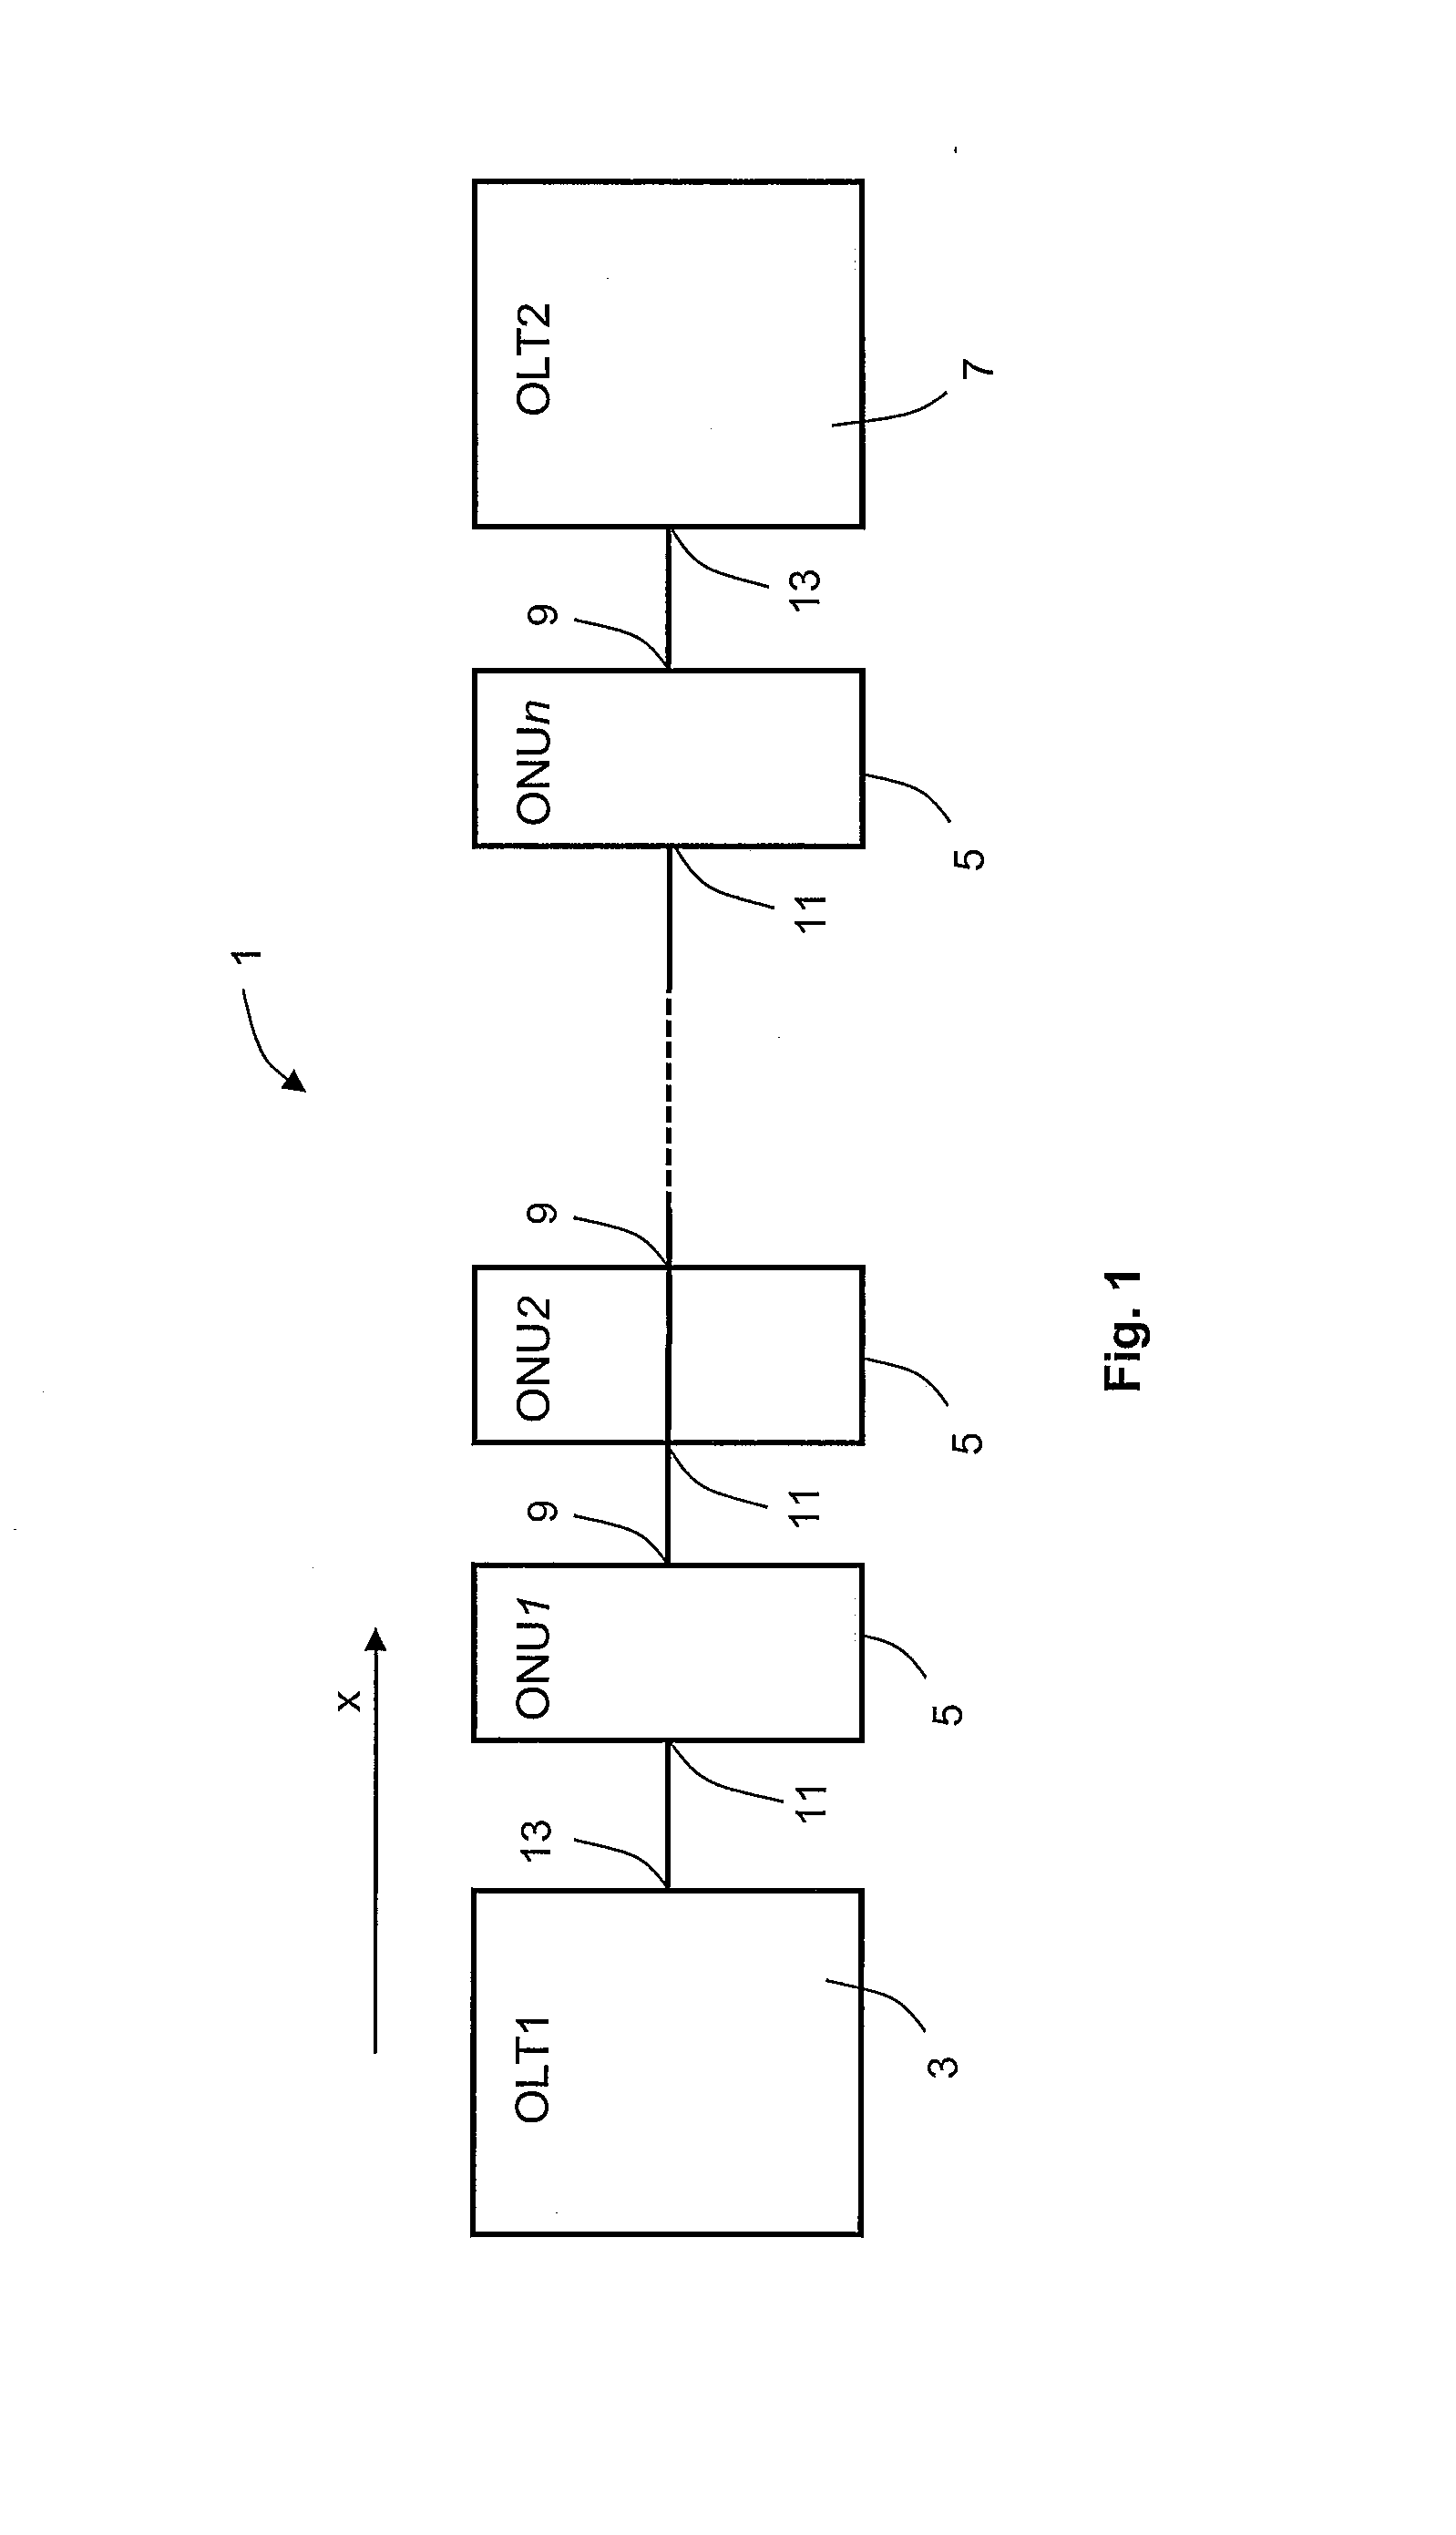 Remote Node and Network Architecture and Data Transmission Method for a Fiber-Optic Network, Especially for Low Bit-Rate Data Transmission